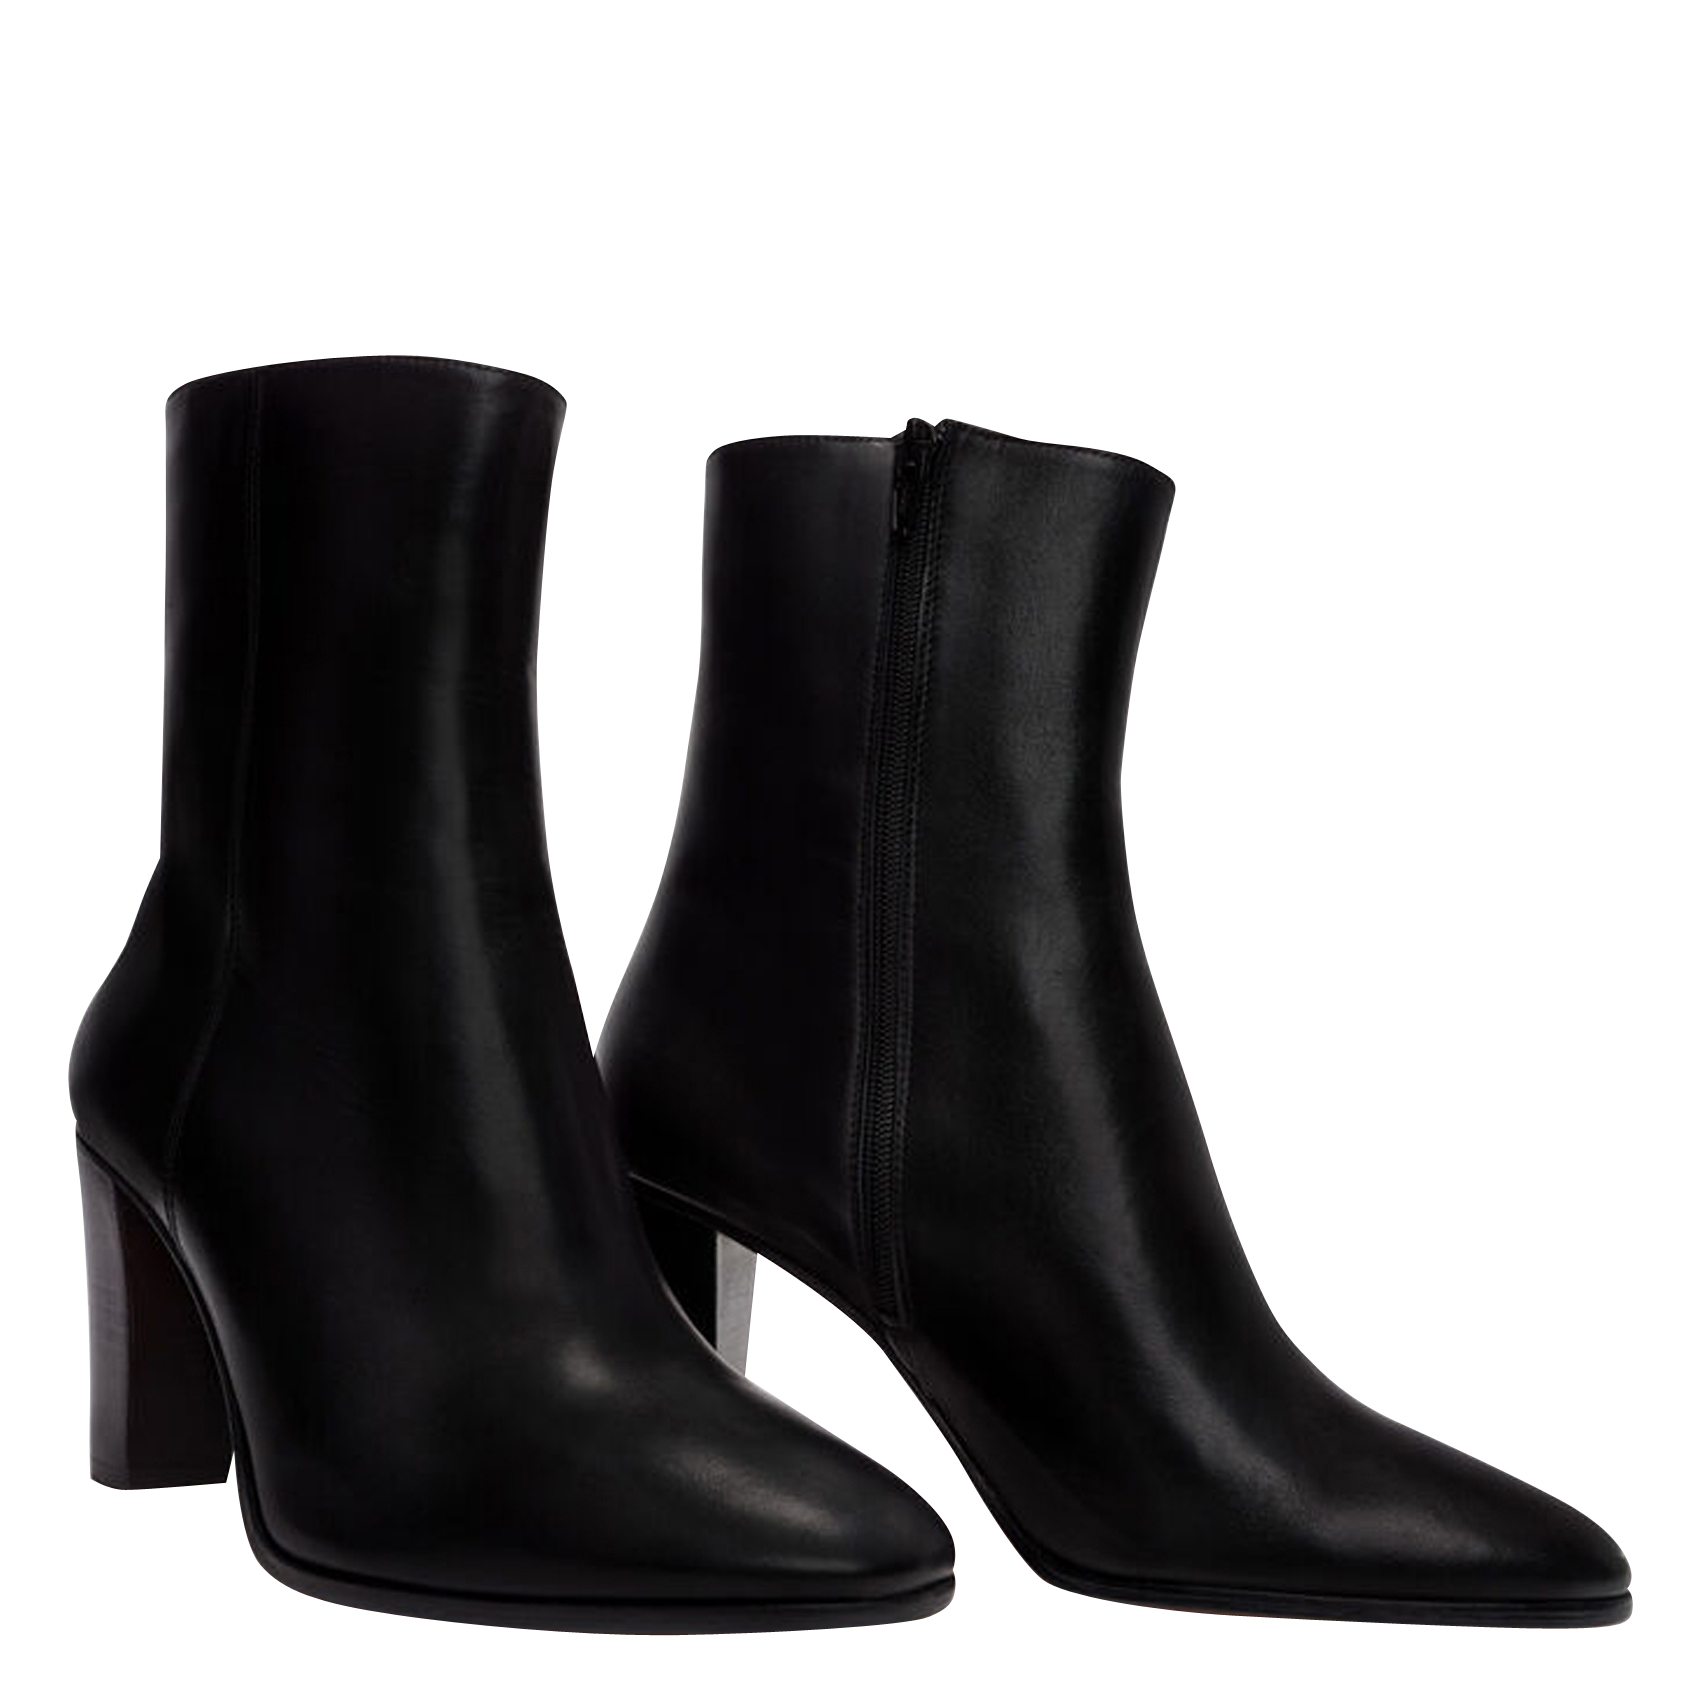 Femme Chaussures Maje Femme Bottines & low boots Maje Femme Bottines & low boots à talons Maje Femme Bottines & low boots à talons Maje Femme Bottines & low boots à talons MAJE 37 noir 